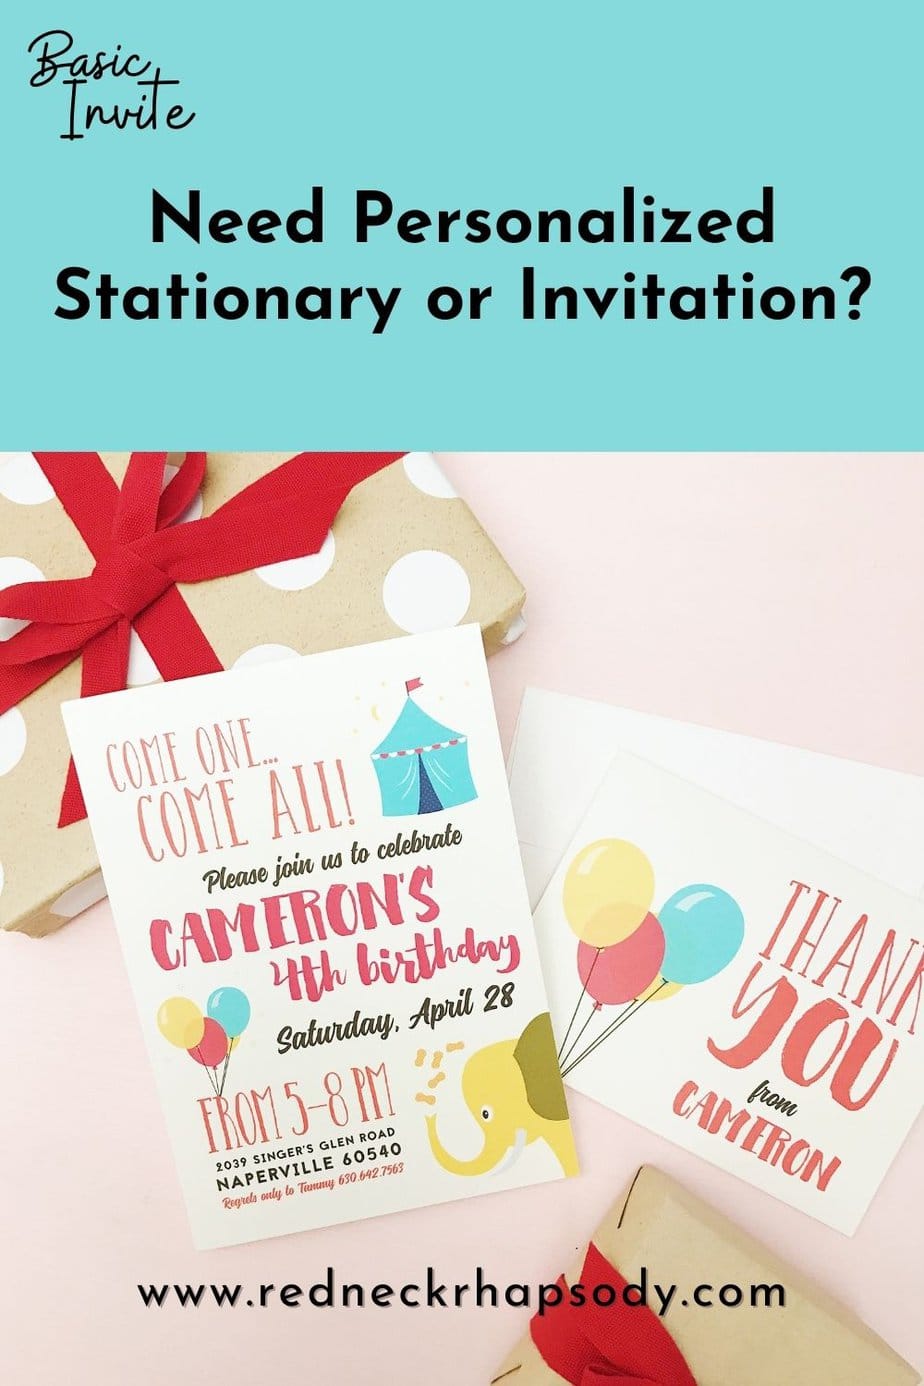 Basic Invite shower invitation is totally perfect for ordering online personalized invitation or card and accessories.